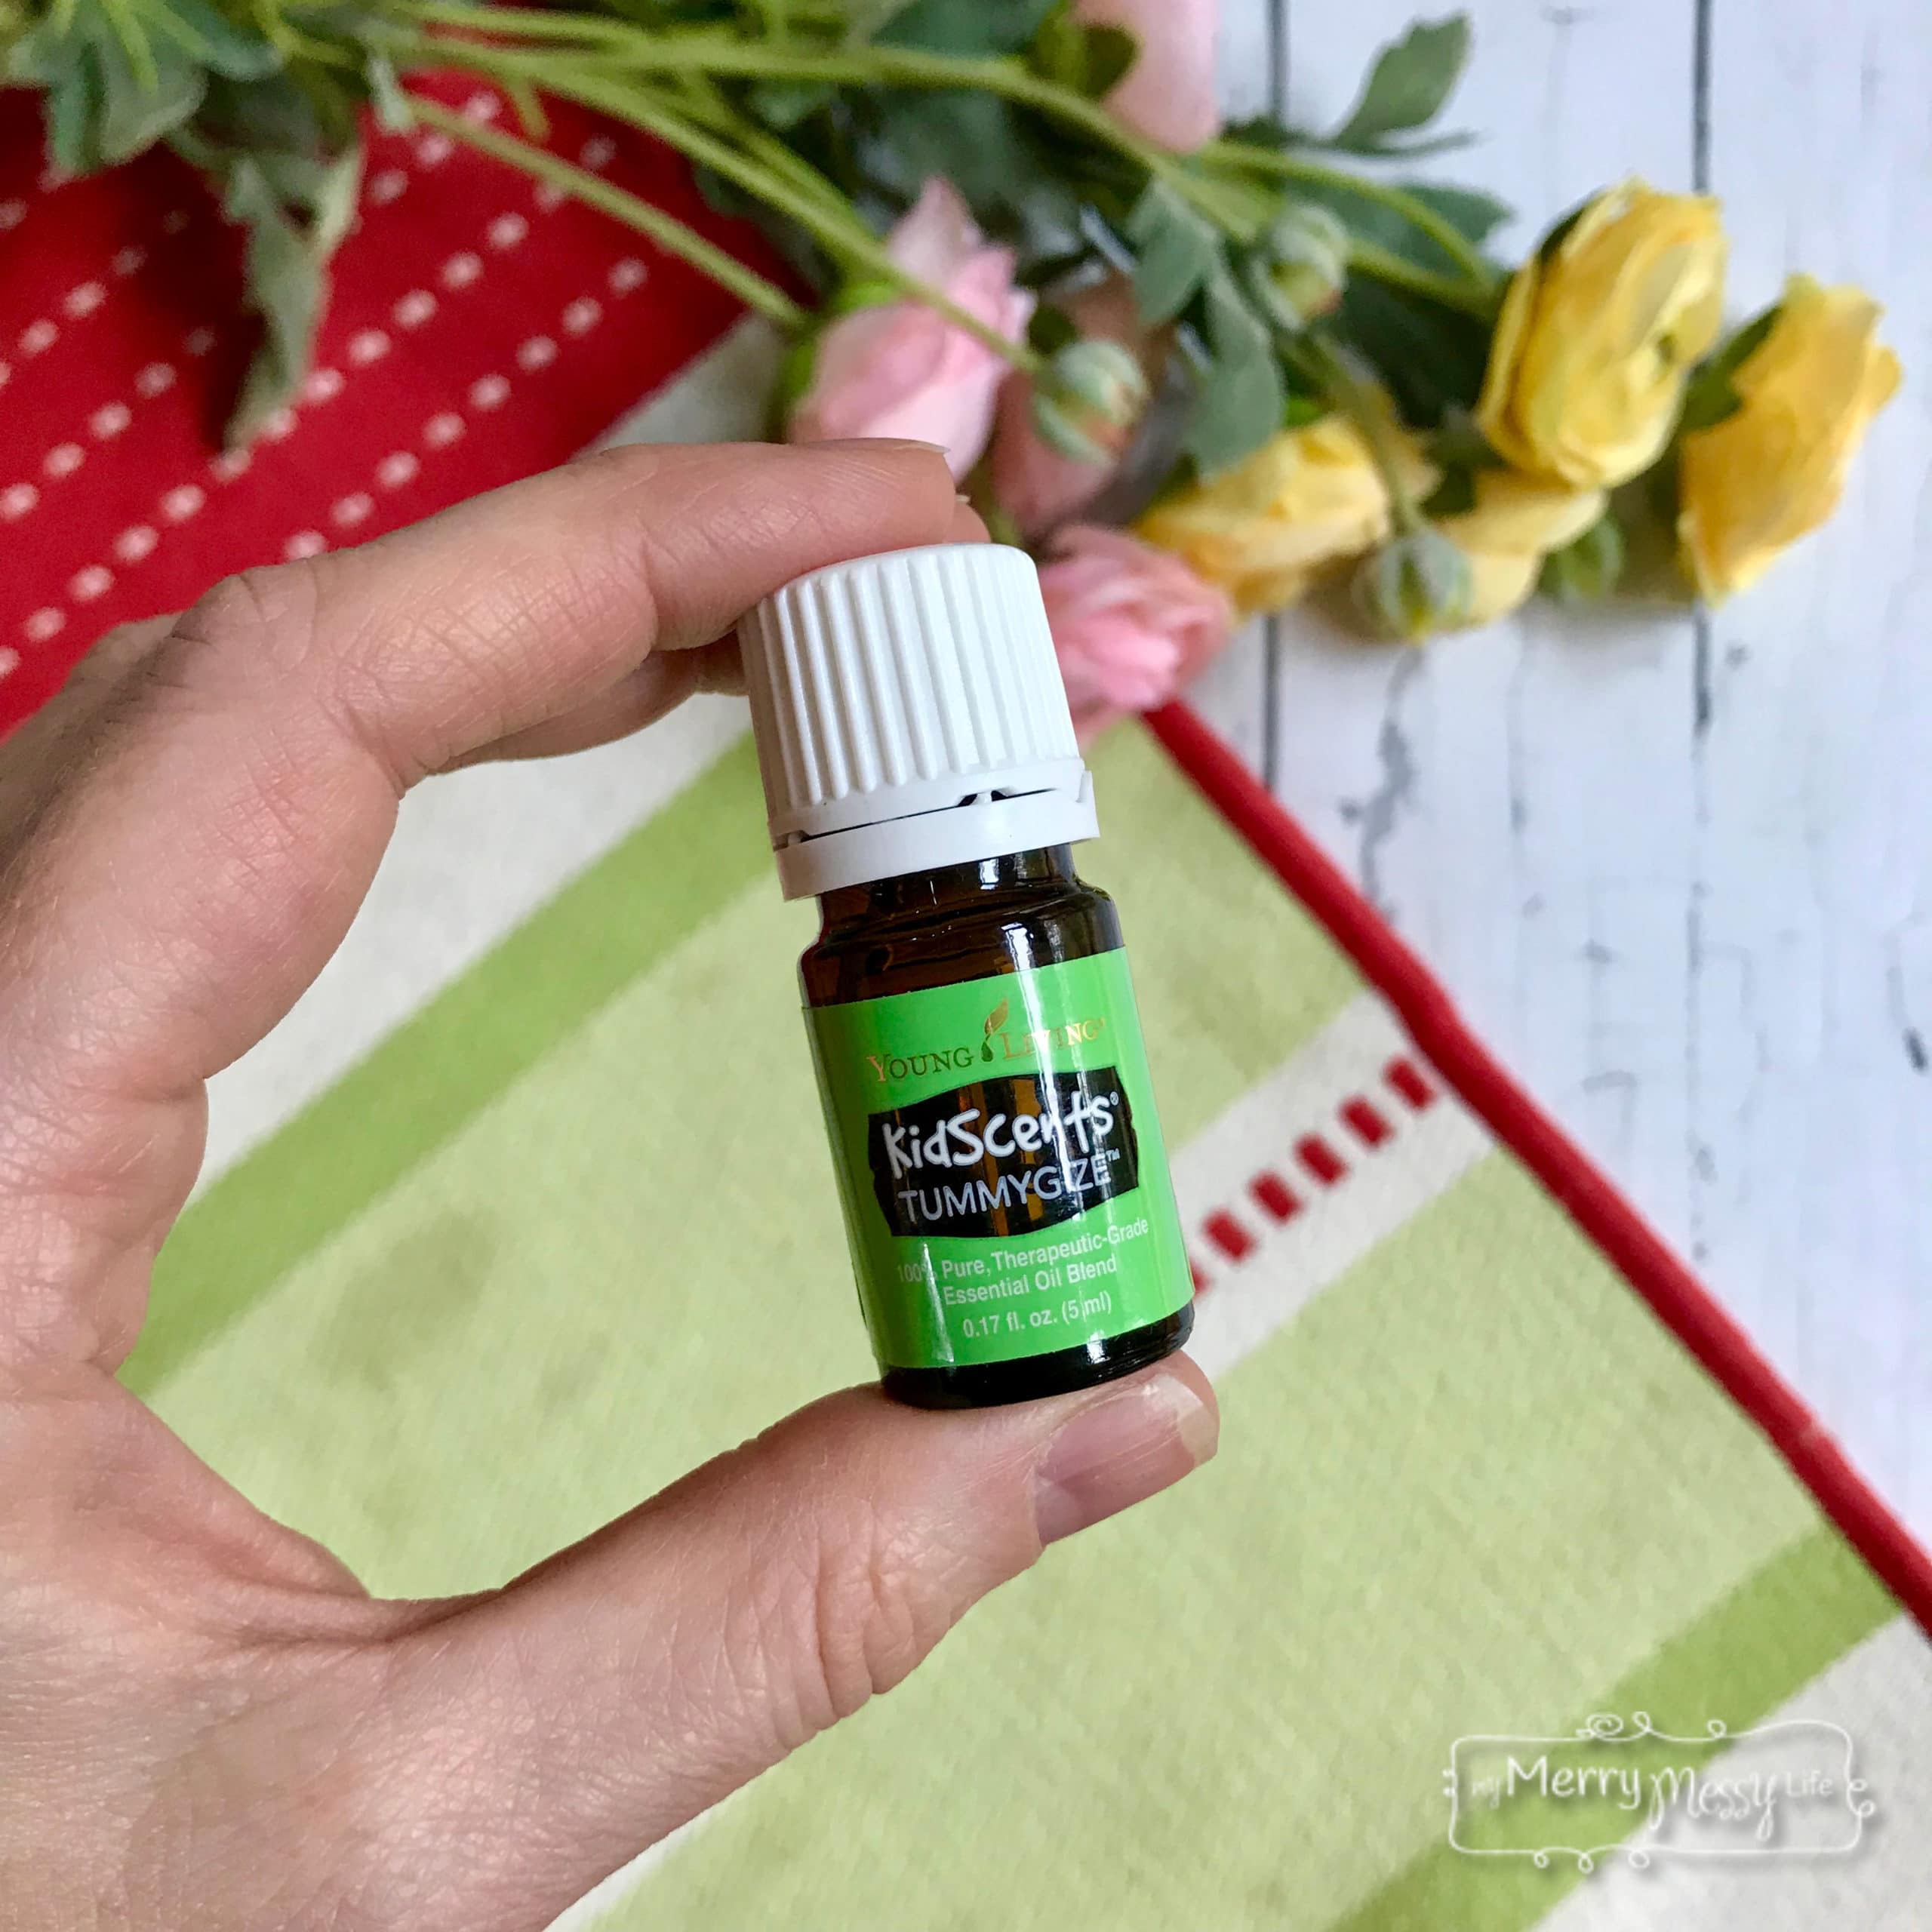 TummyGize essential oil blend for Kids' Tummies and Digestion